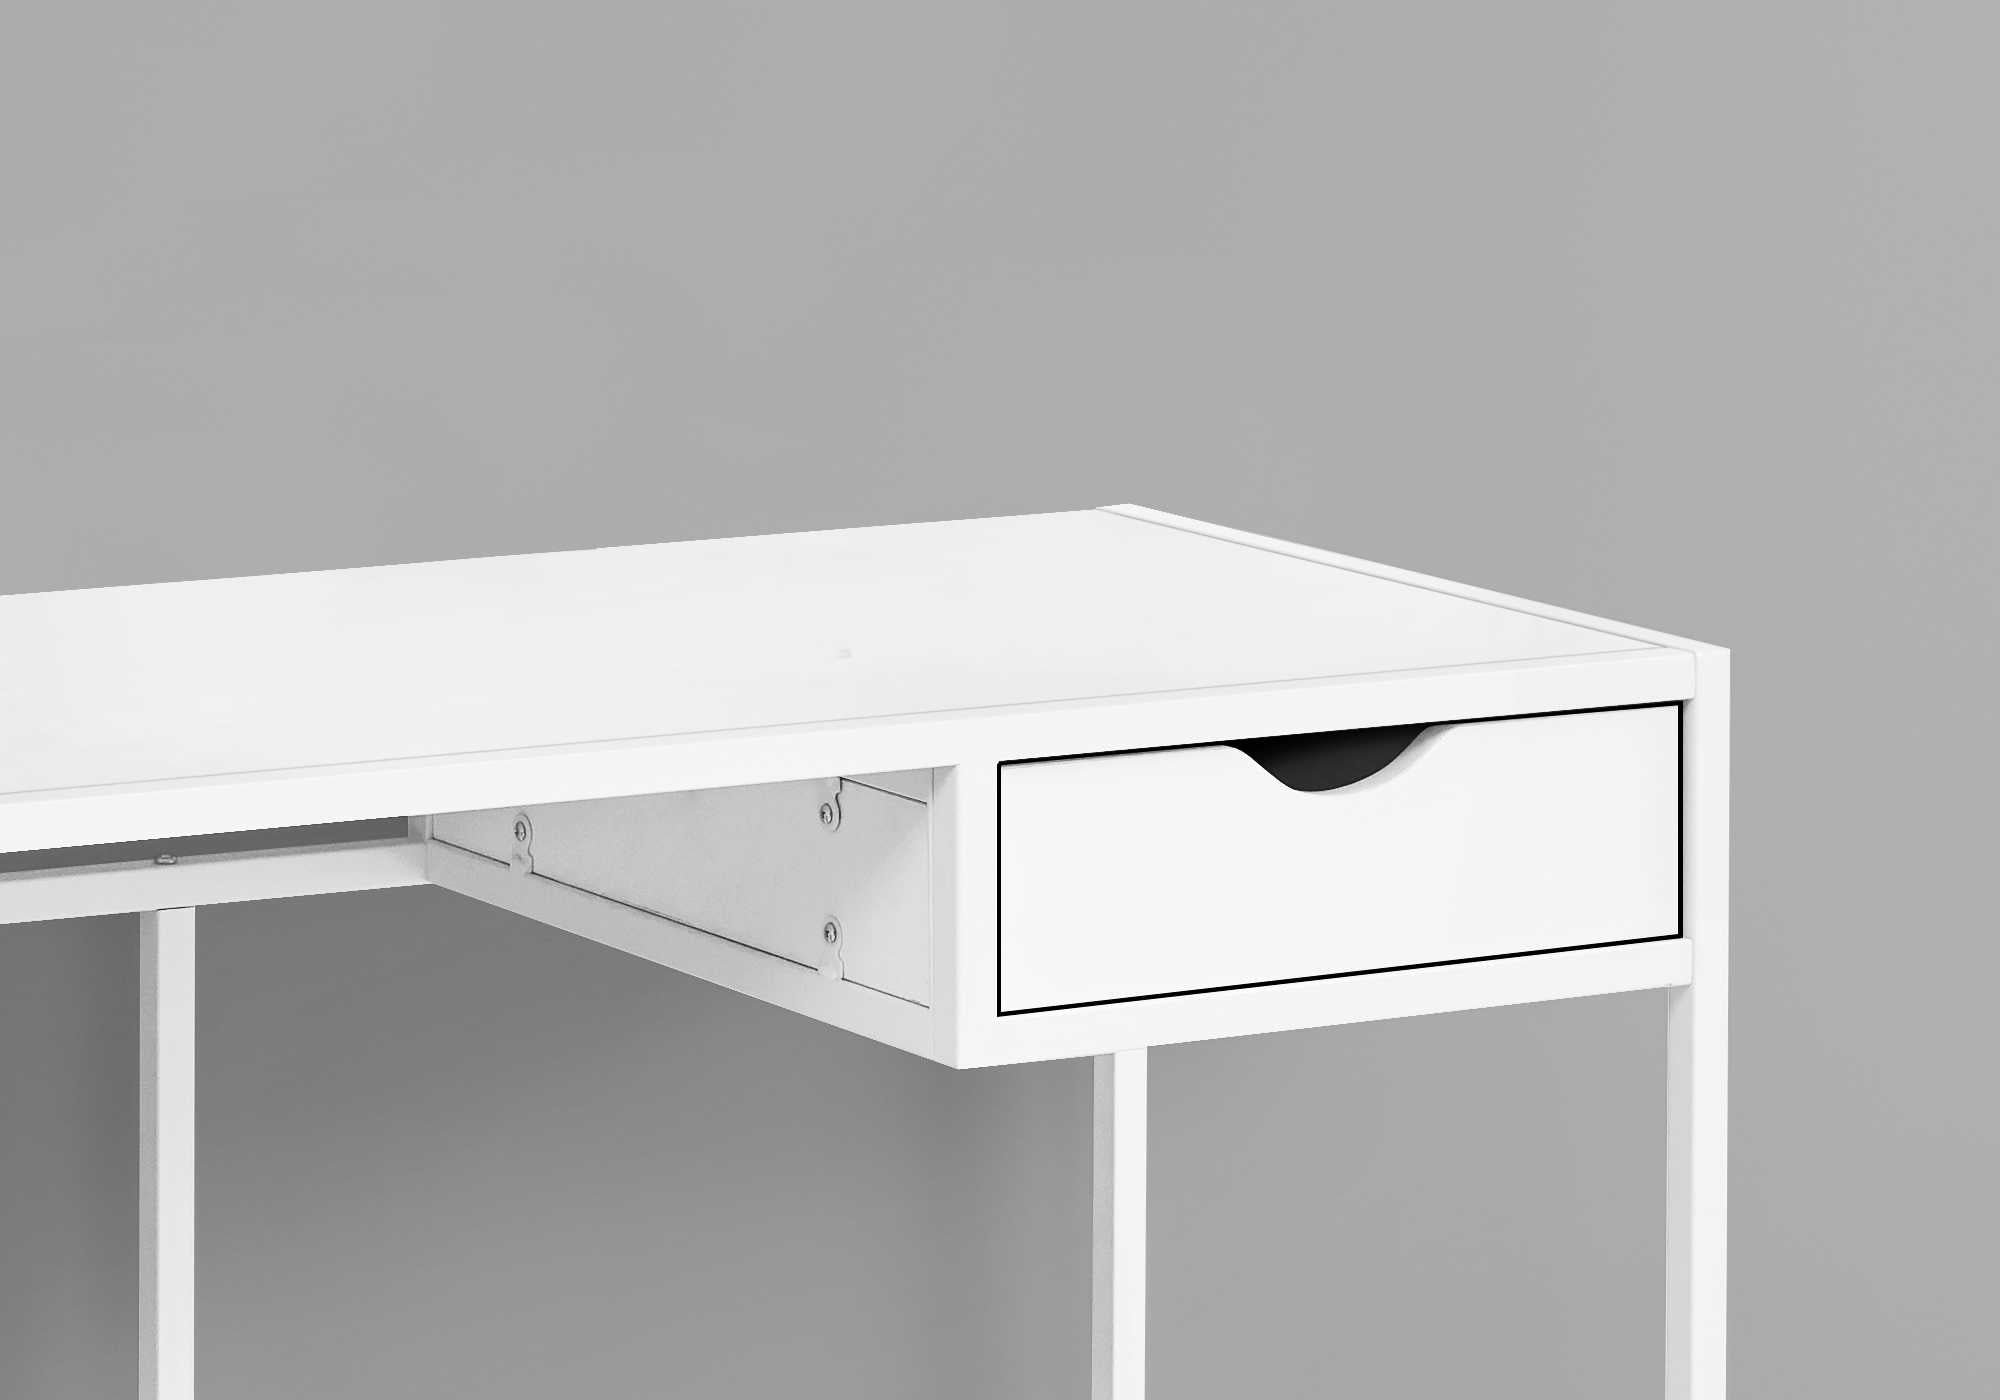 I 7570 - COMPUTER DESK - 42"L / WHITE / WHITE METAL BY MONARCH SPECIALTIES INC